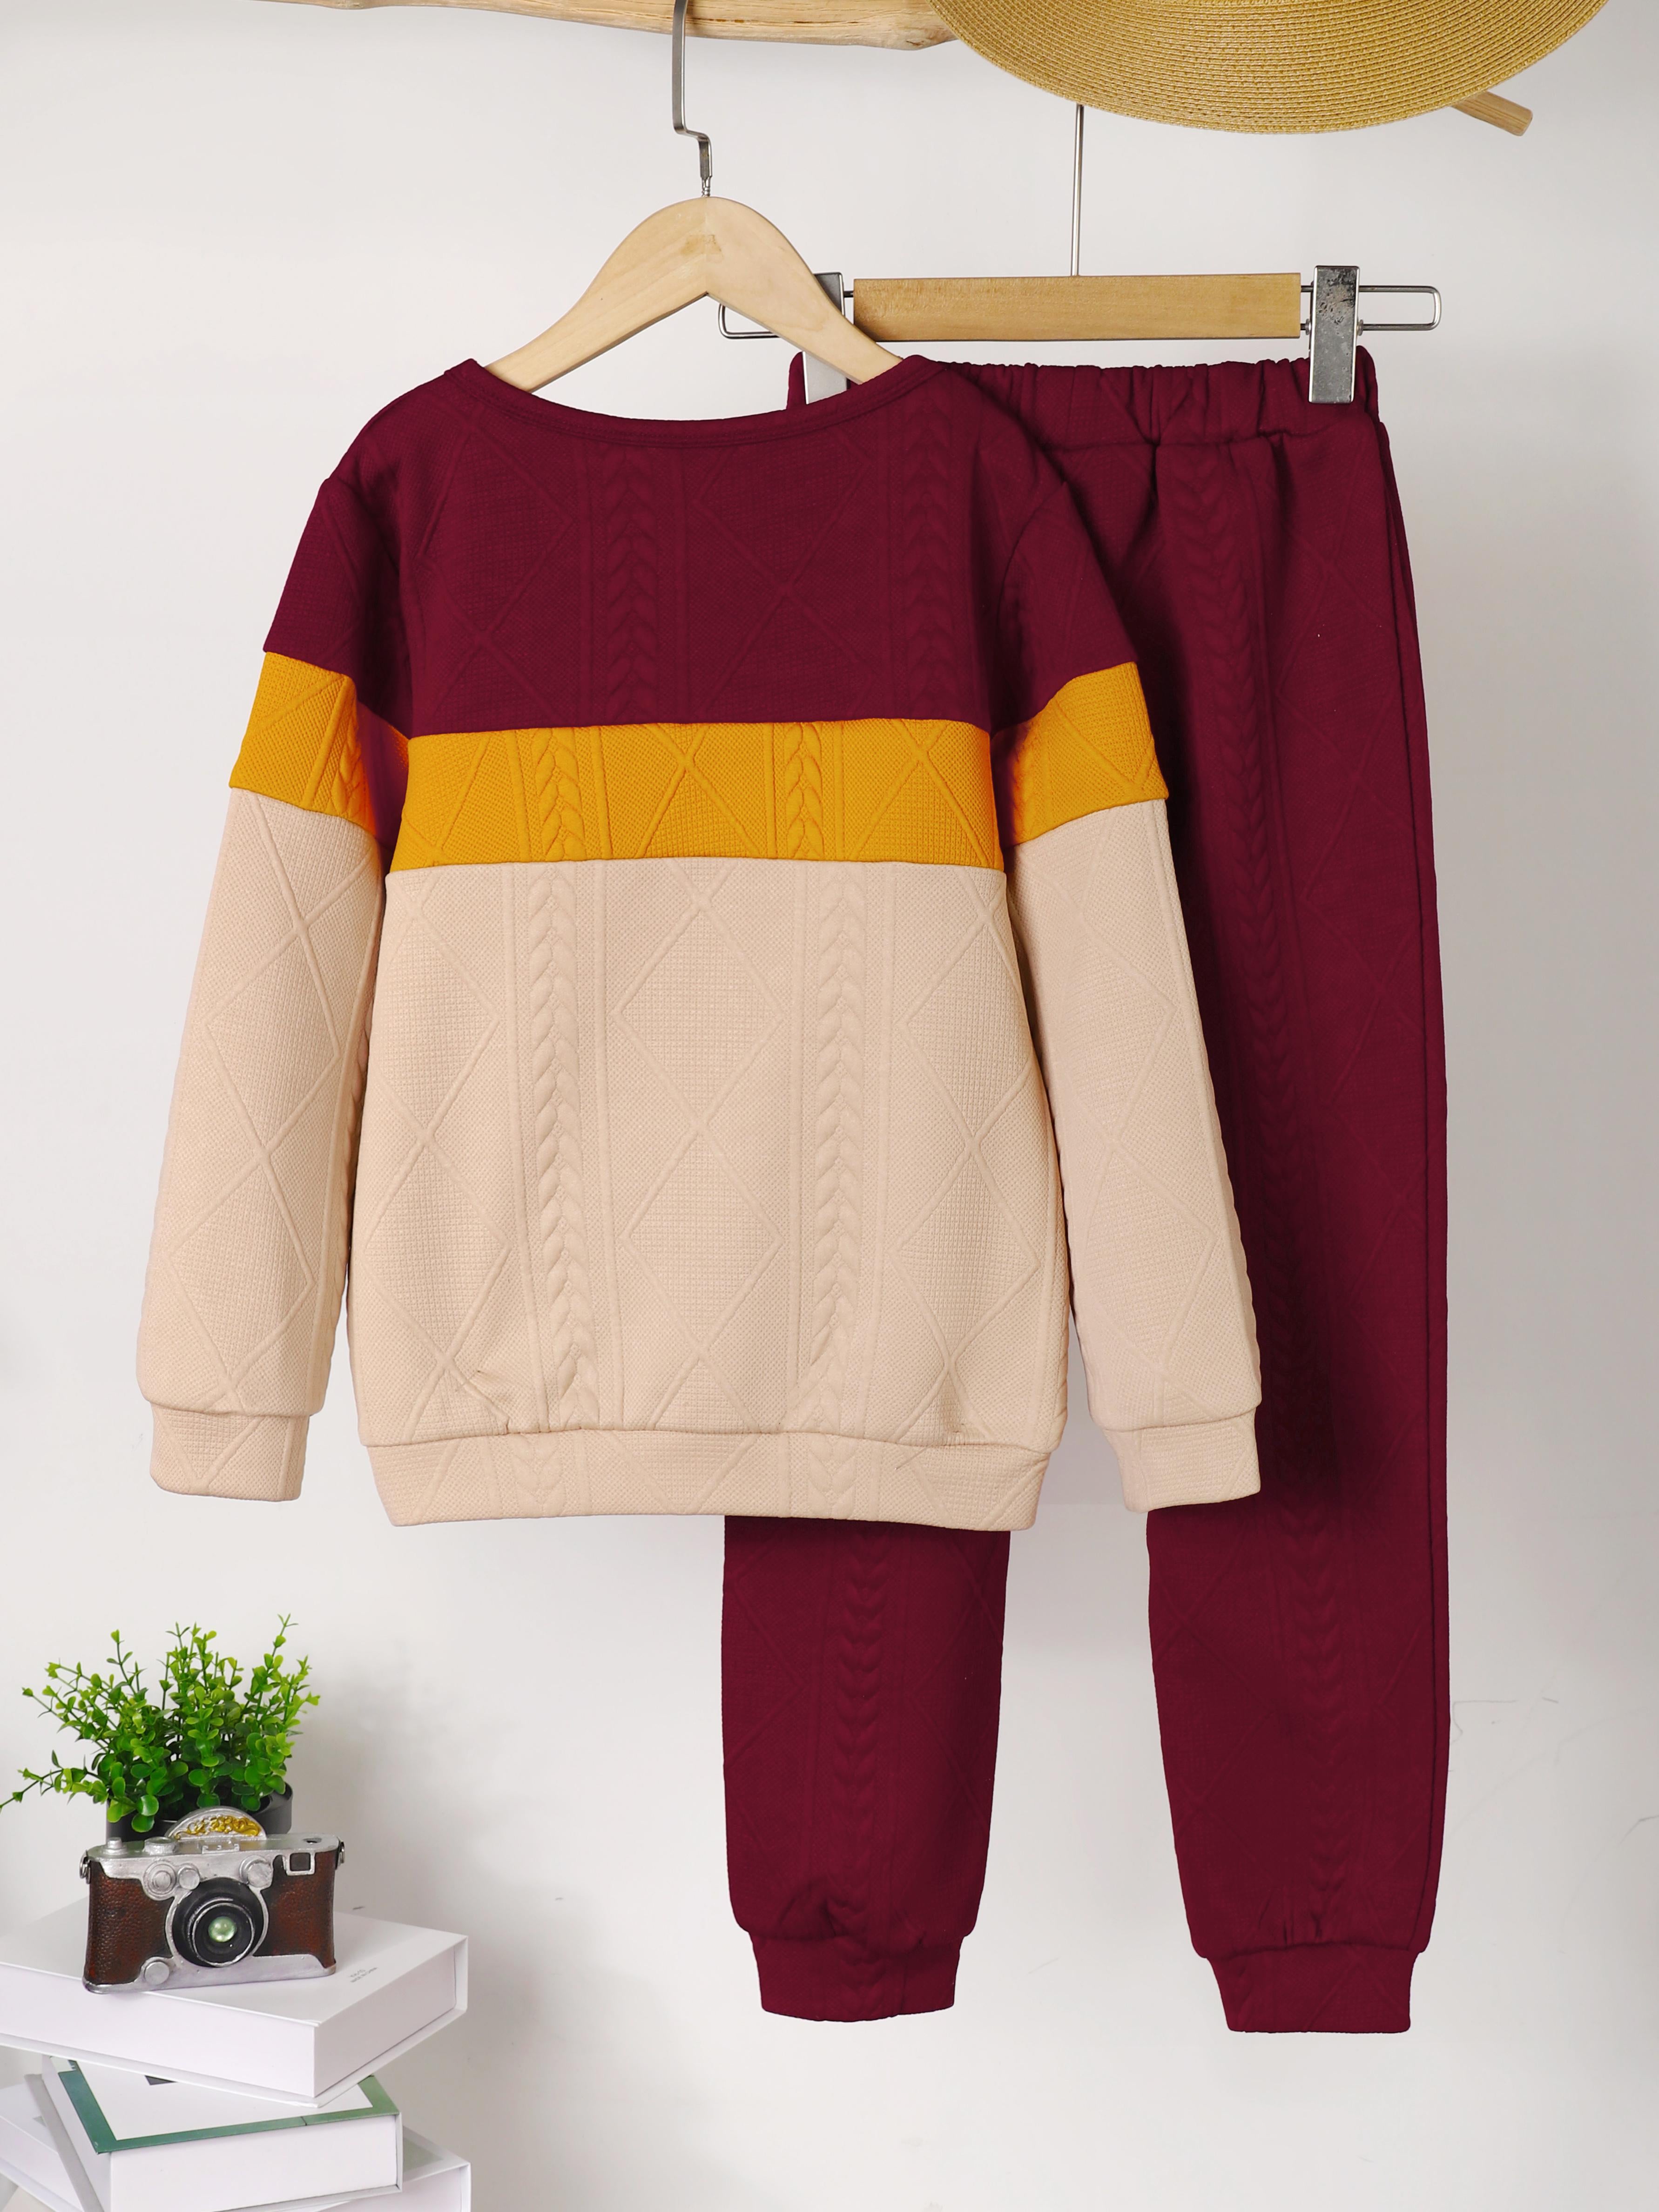 8-14Y Ready Stock Kids Boys Outfits Pants Sets Splice Long Sleeve Sweater For Fall Winter Essential Pants 2Pcs Clothes Set Catpapa 462305012